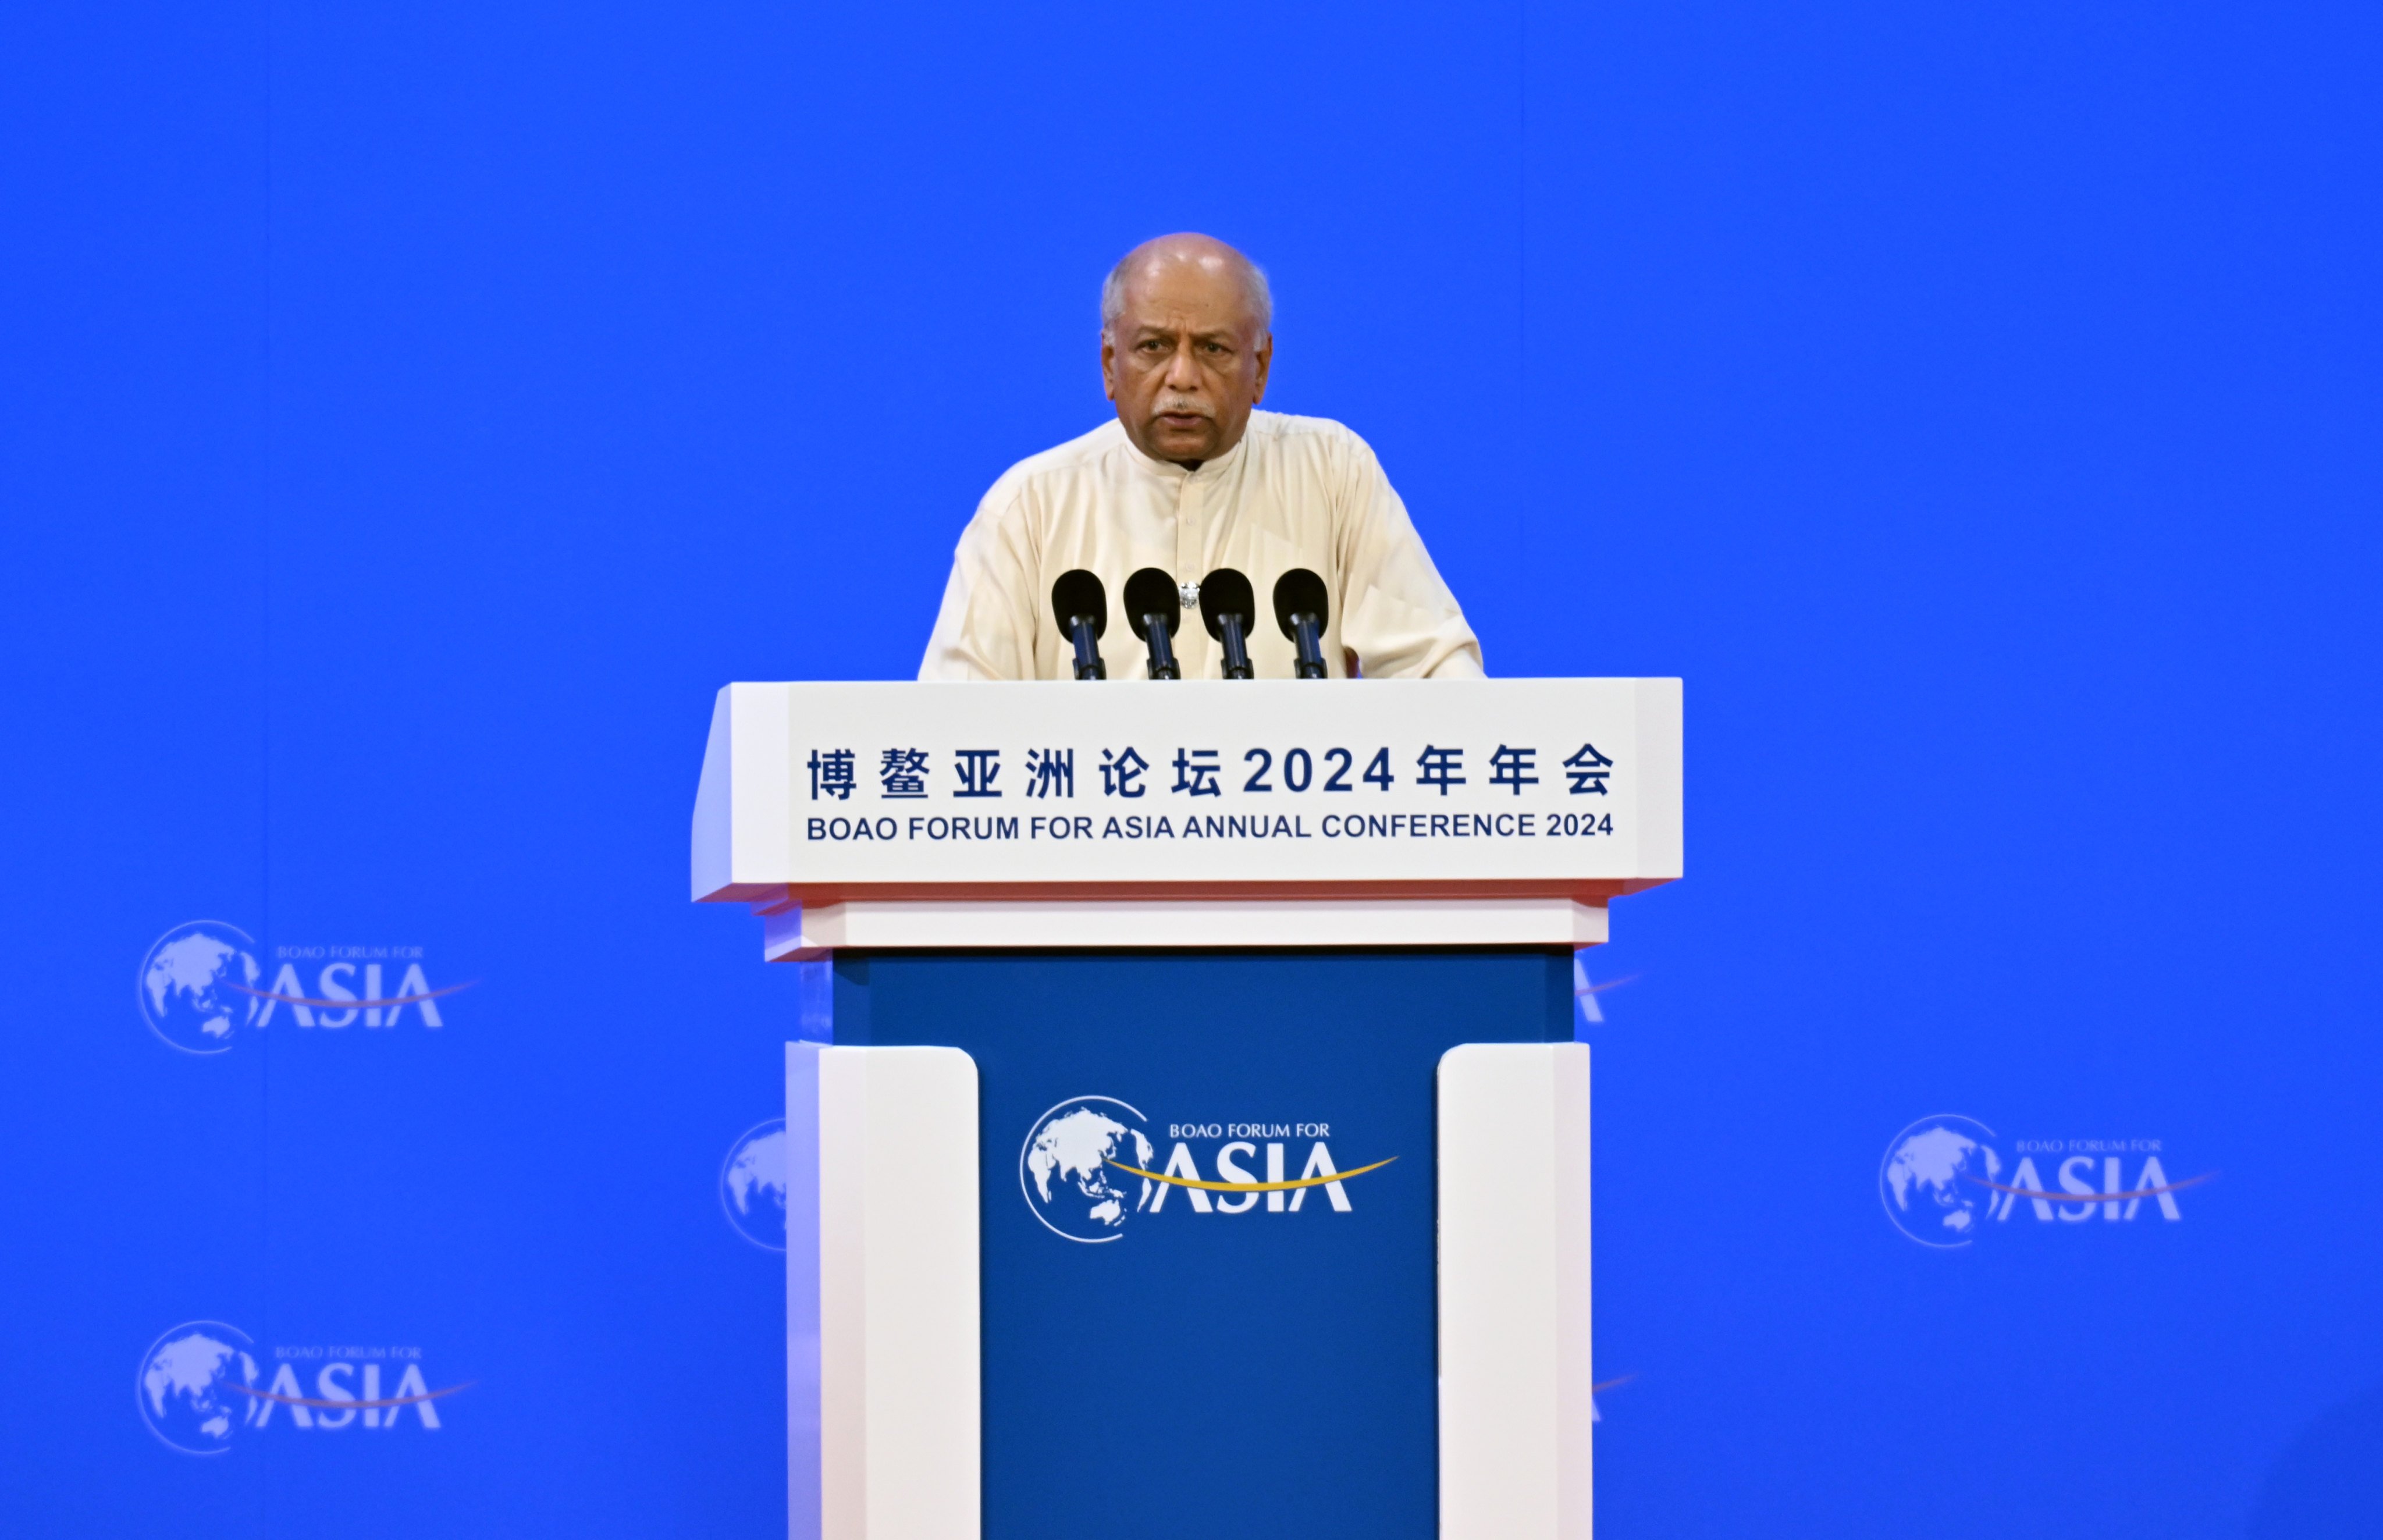 Sri Lankan Prime Minister Dinesh Gunawardena delivers a speech at the opening ceremony of the Boao Forum for Asia Annual Conference 2024 in Boao, south China’s Hainan province, on Thursday. Photo: Xinhua 